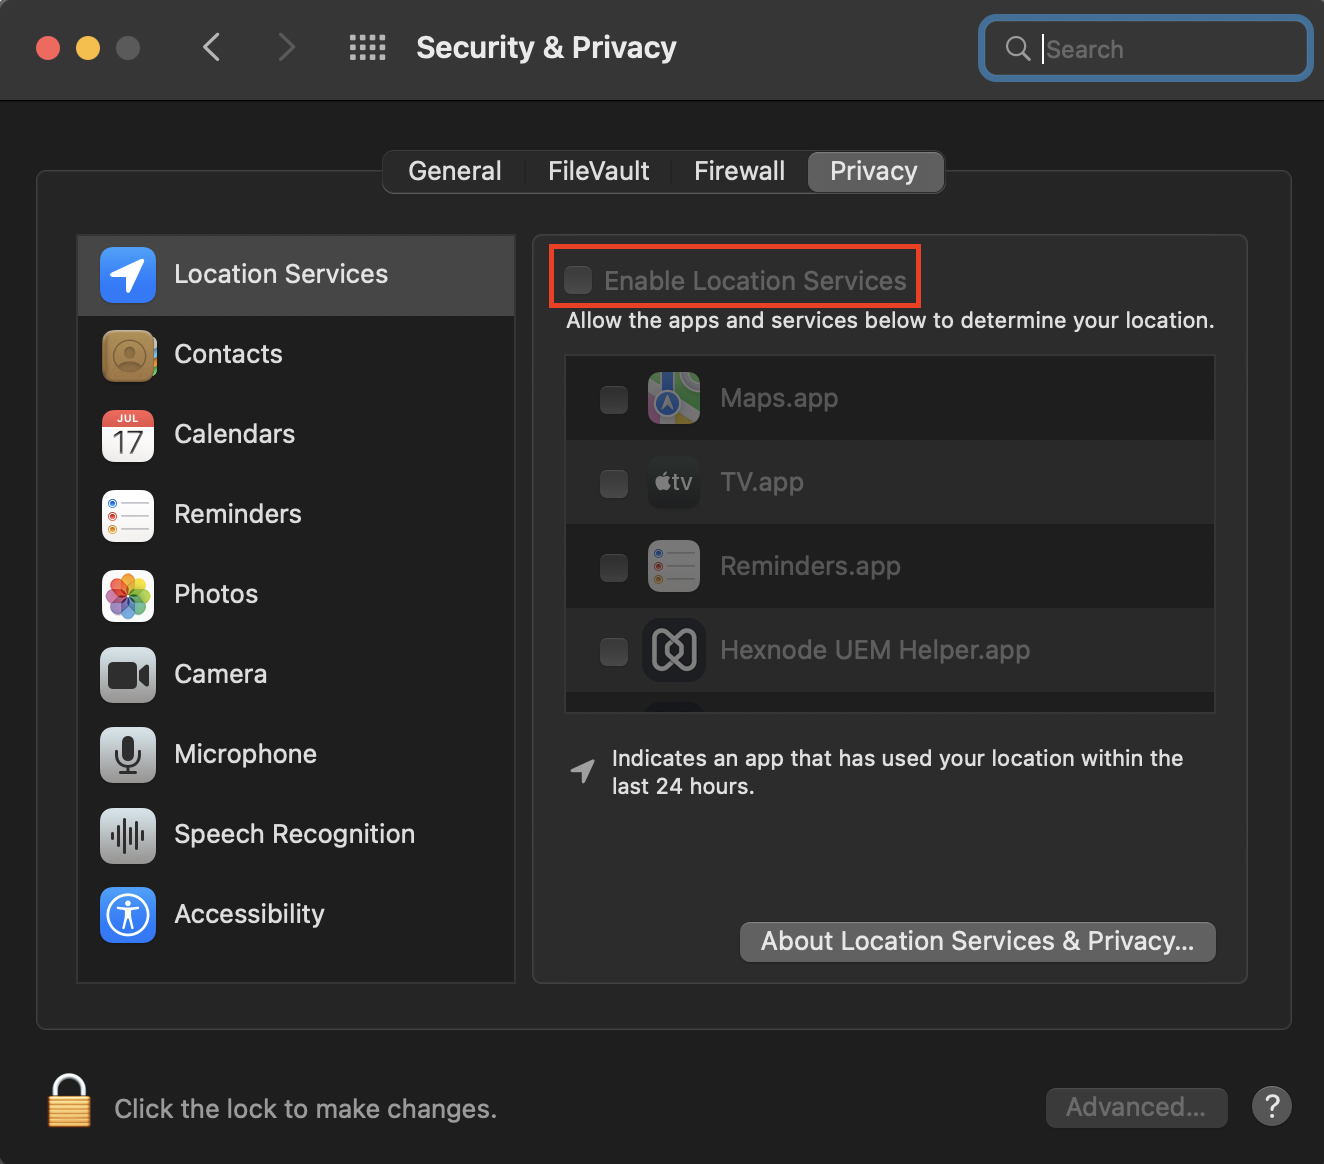 Location services disabled at the device end under Security & Privacy preferences